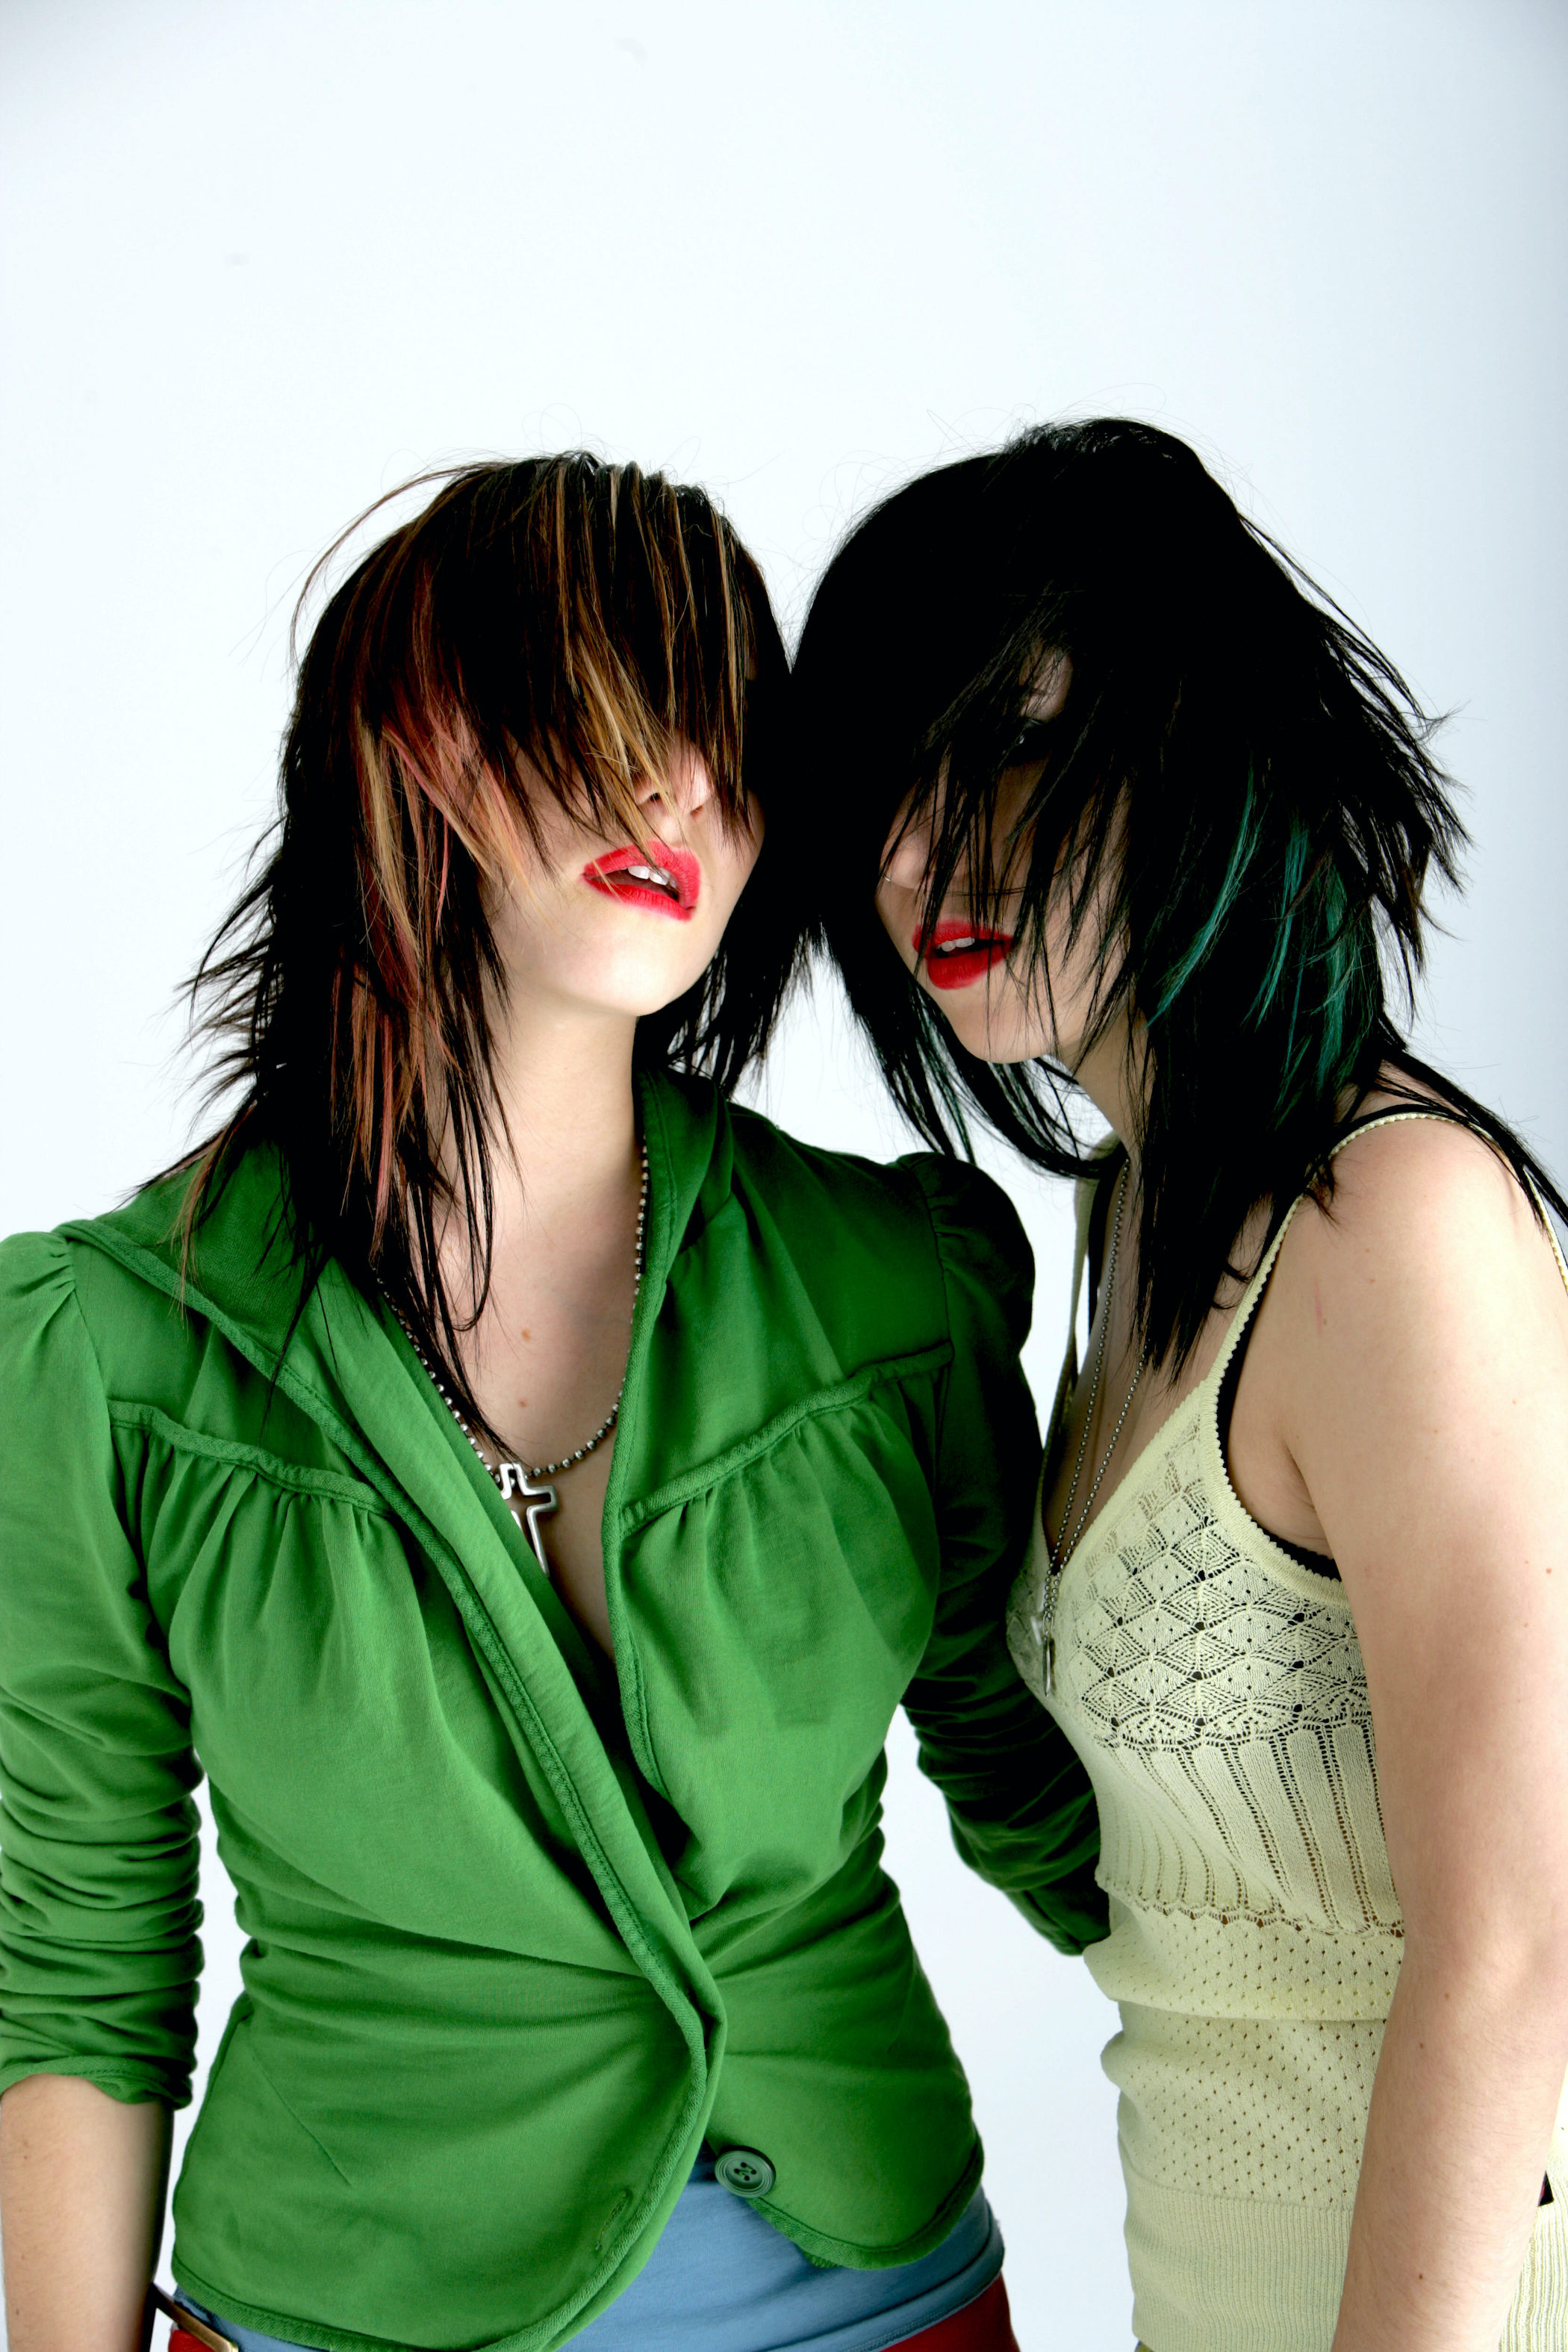 The Veronicas by Brisbane photographer David Kelly